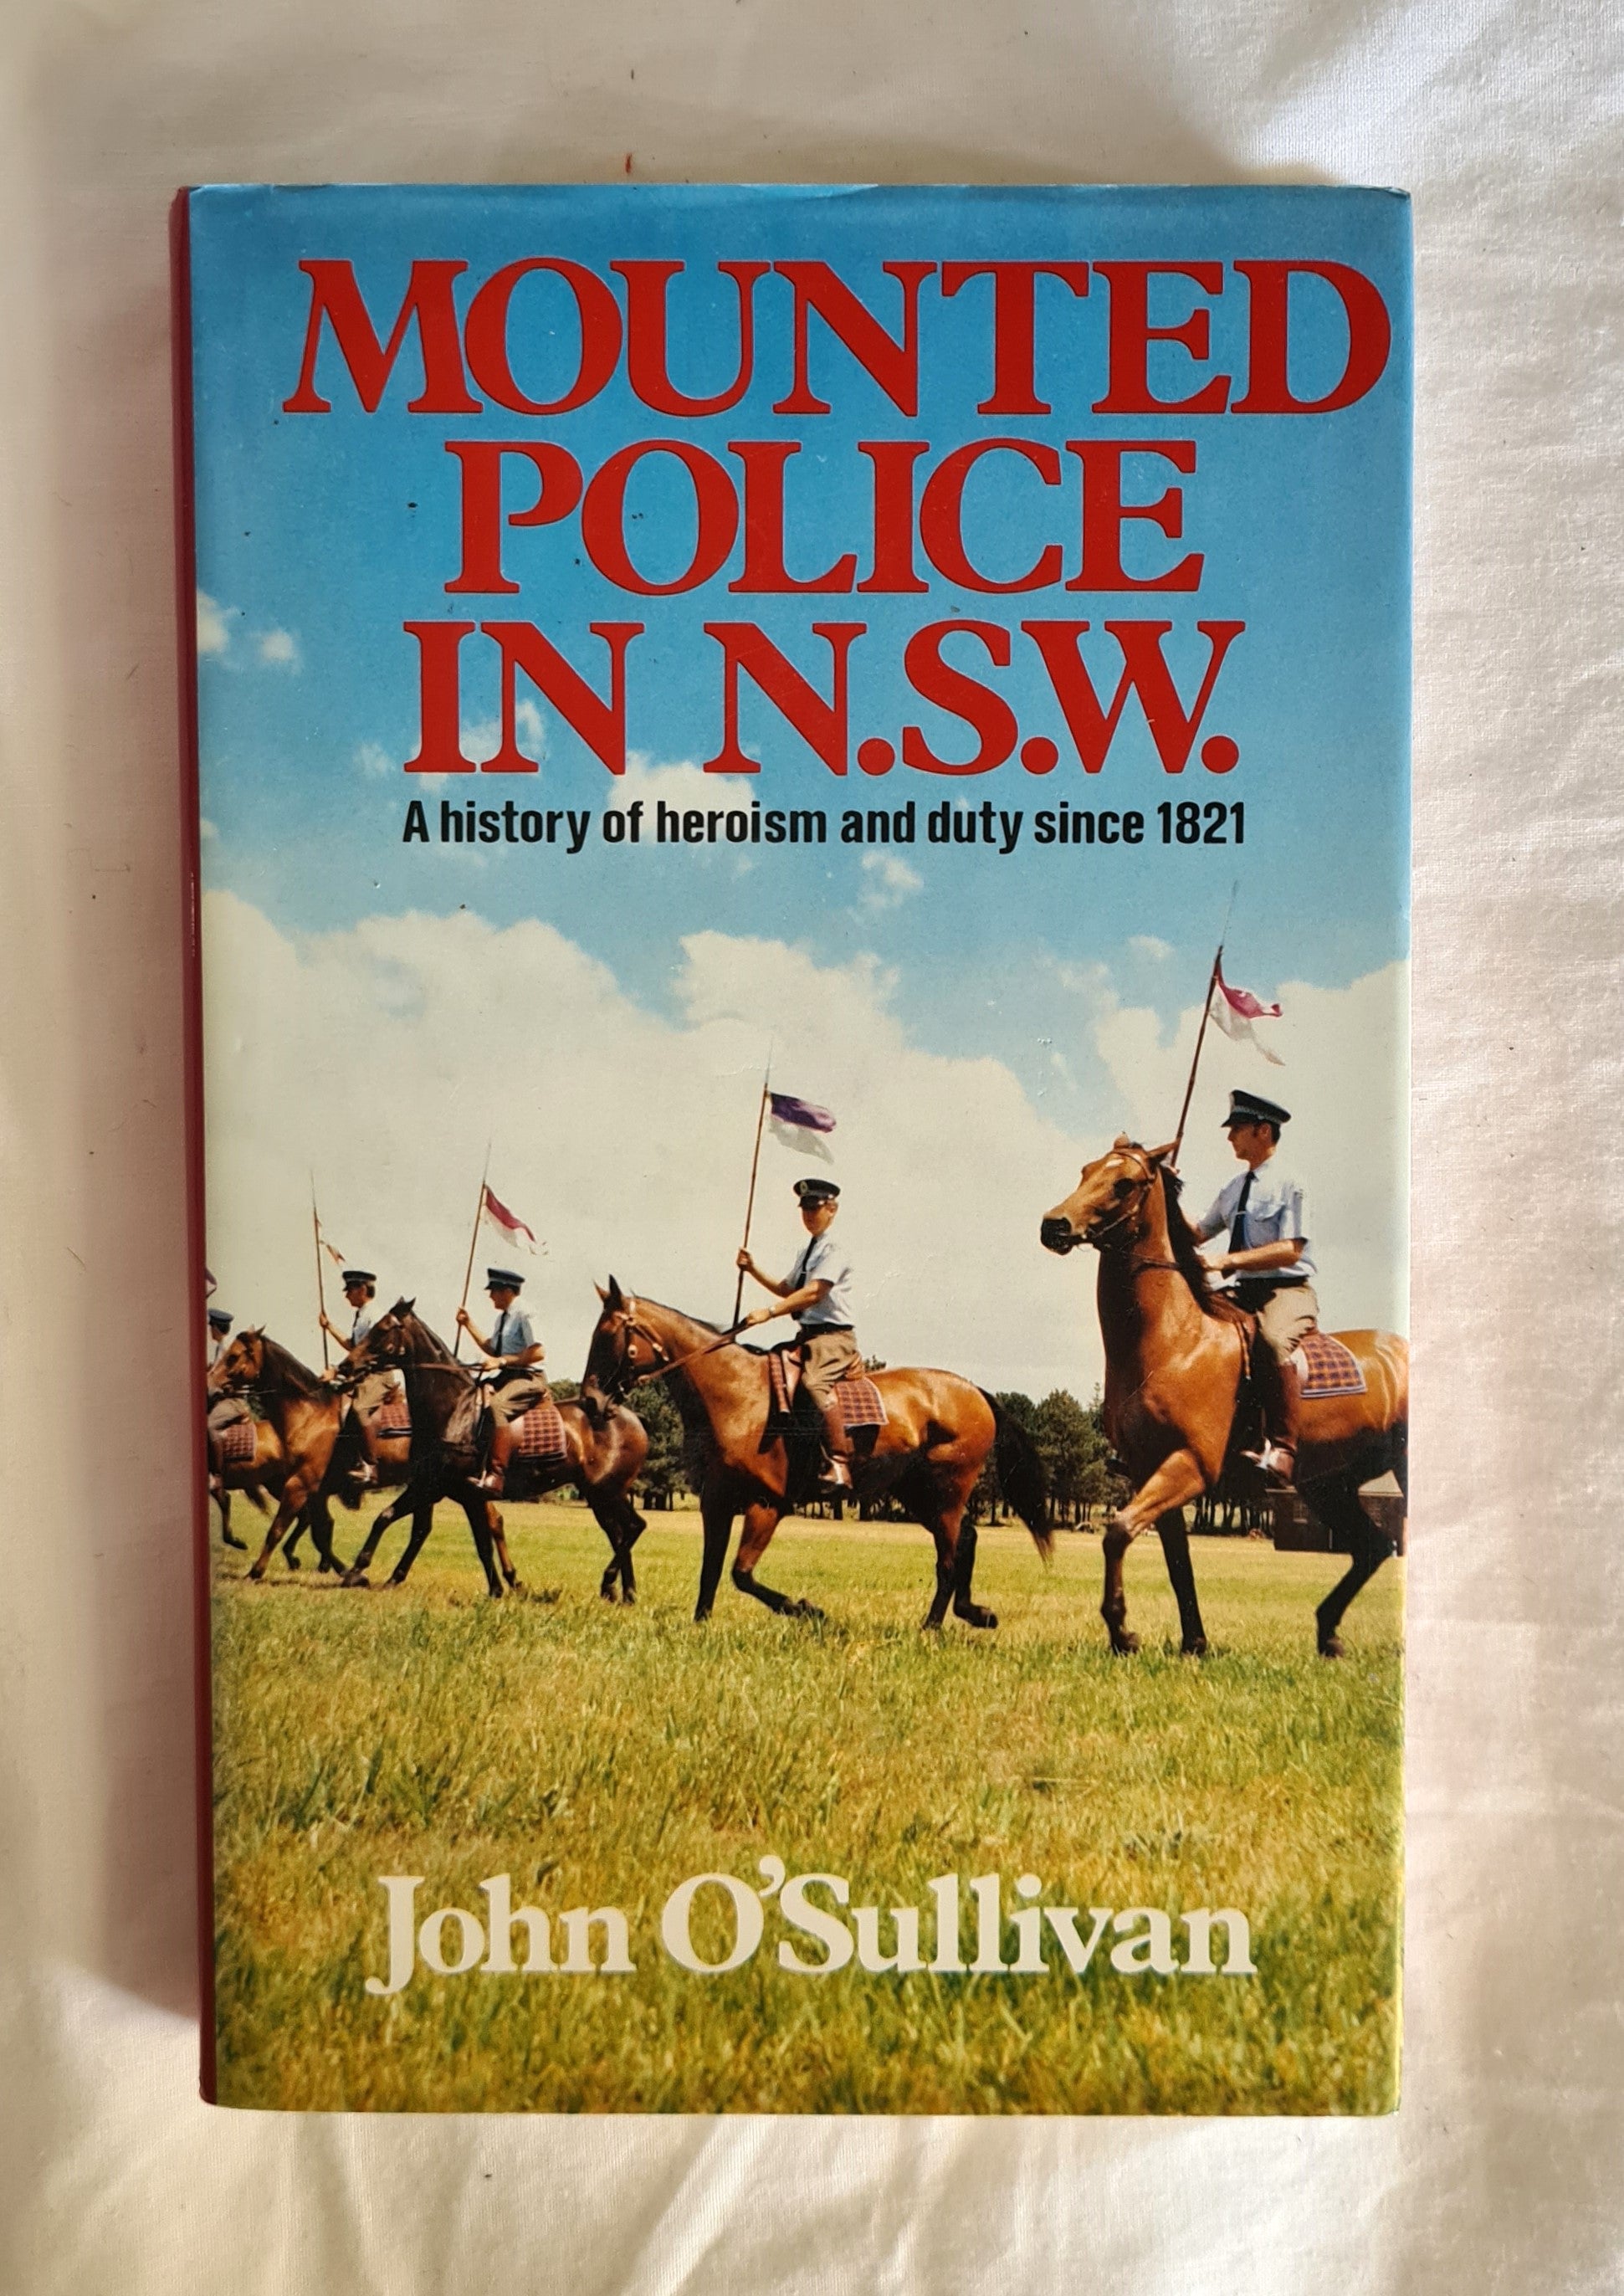 Mounted Police in N.S.W.  A history of heroism and duty since 1821  by John O’Sullivan